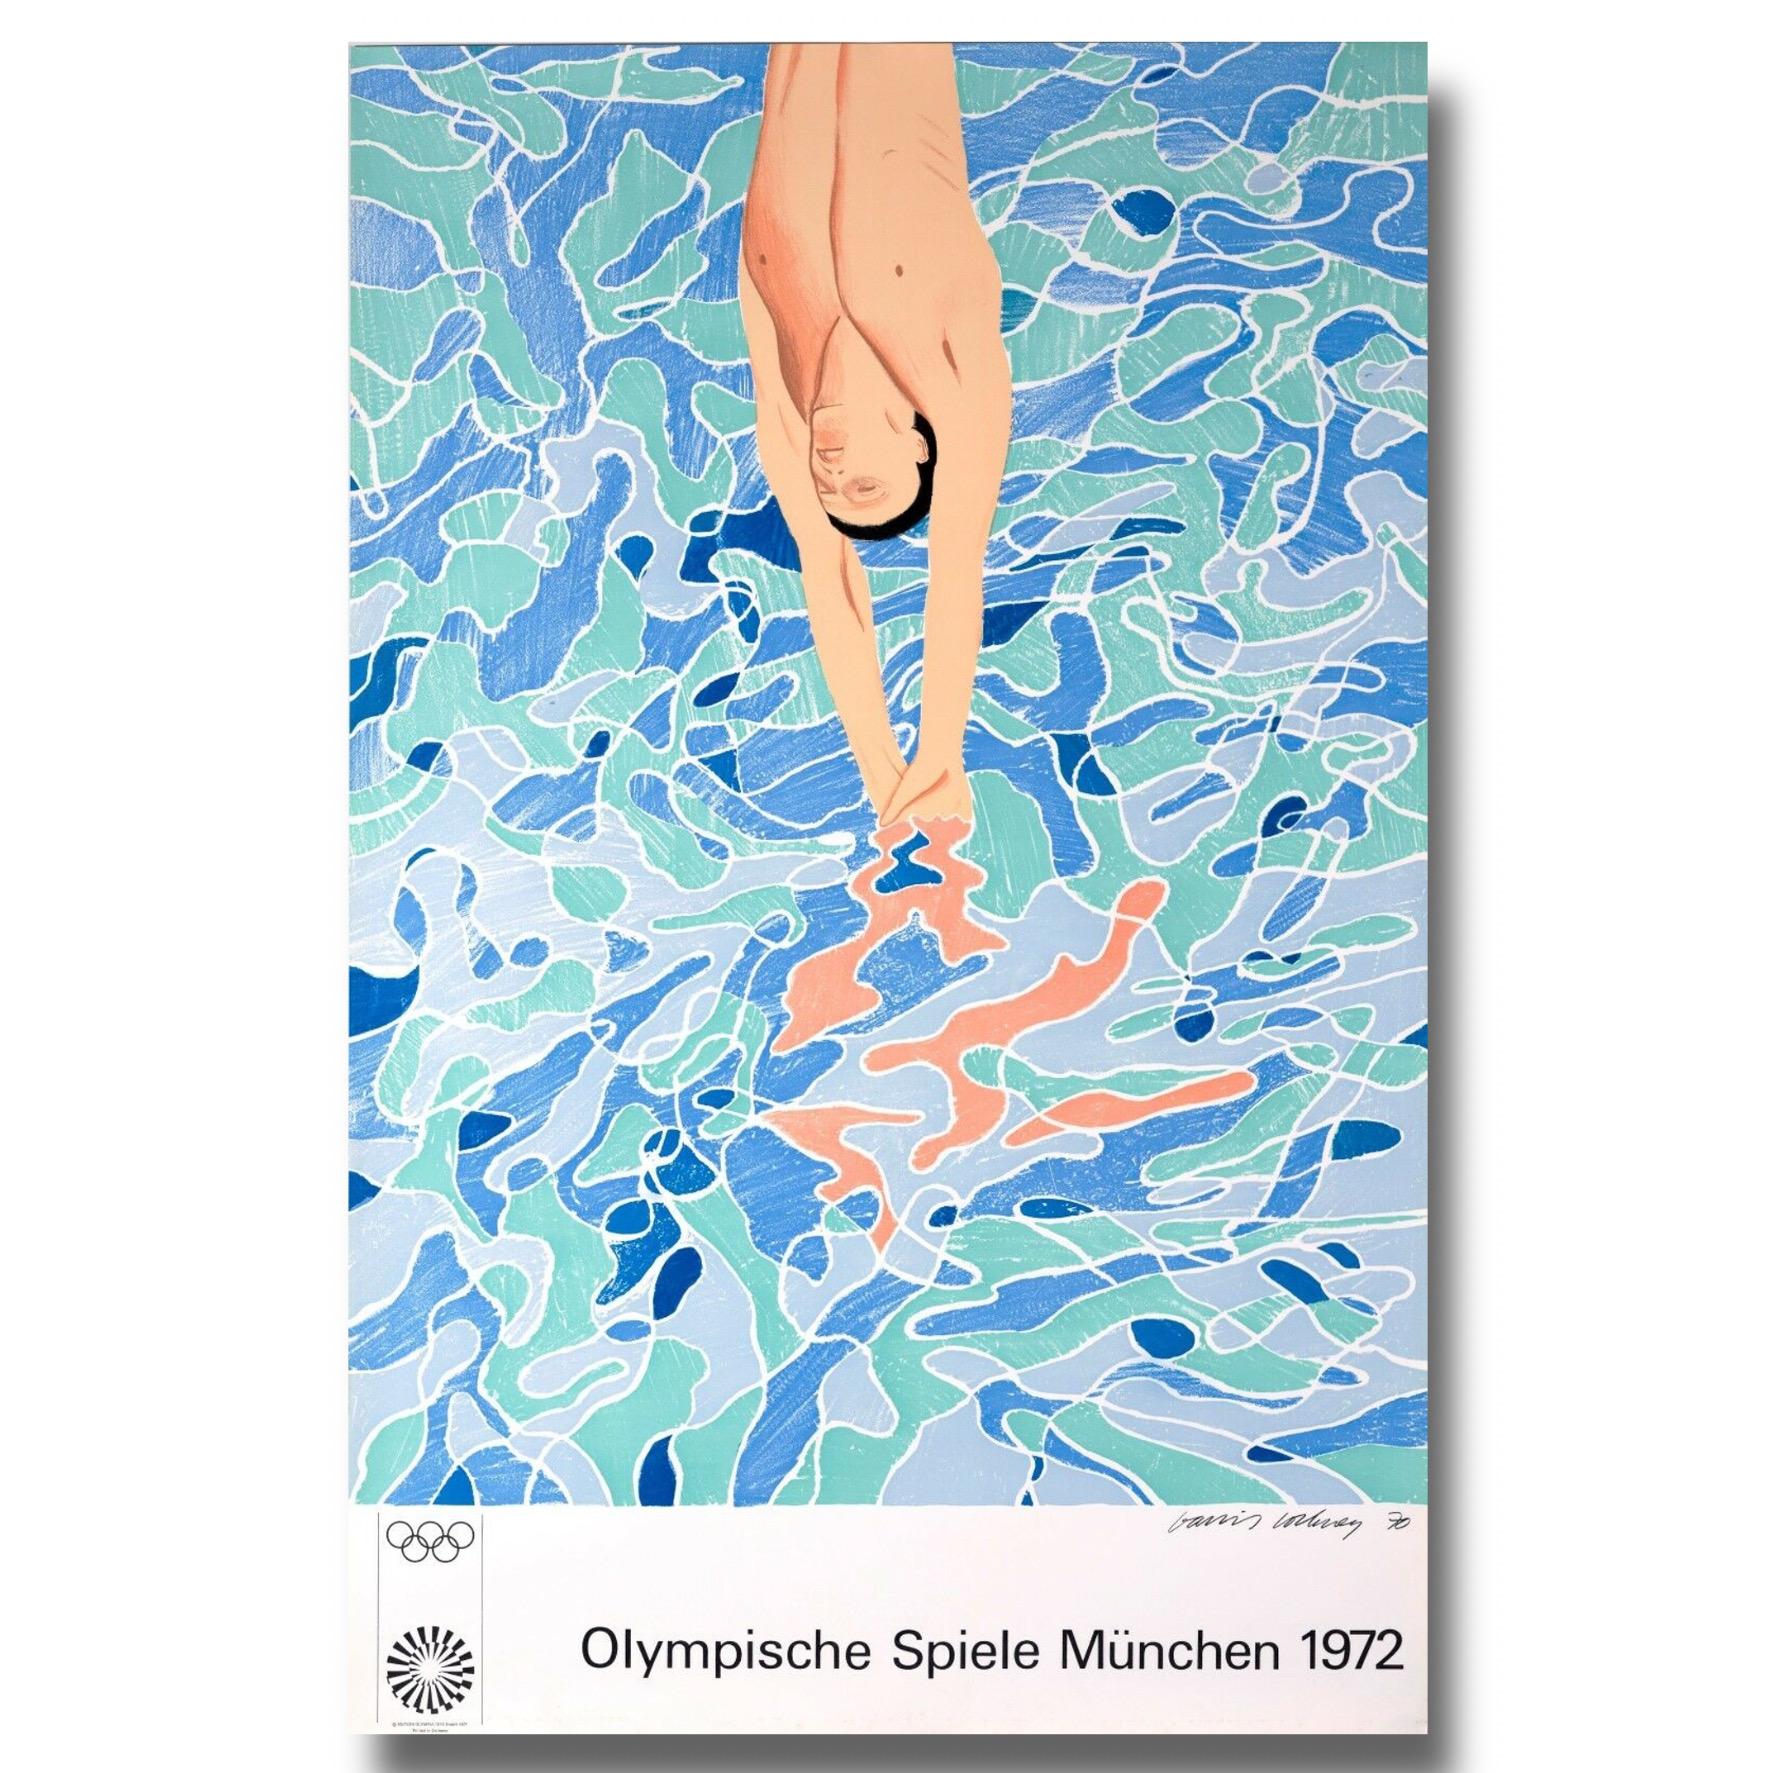 David Hockney Figurative Print - The Diver - Olympic Games 1972 Munich - Original Poster - Edition Olympia Print